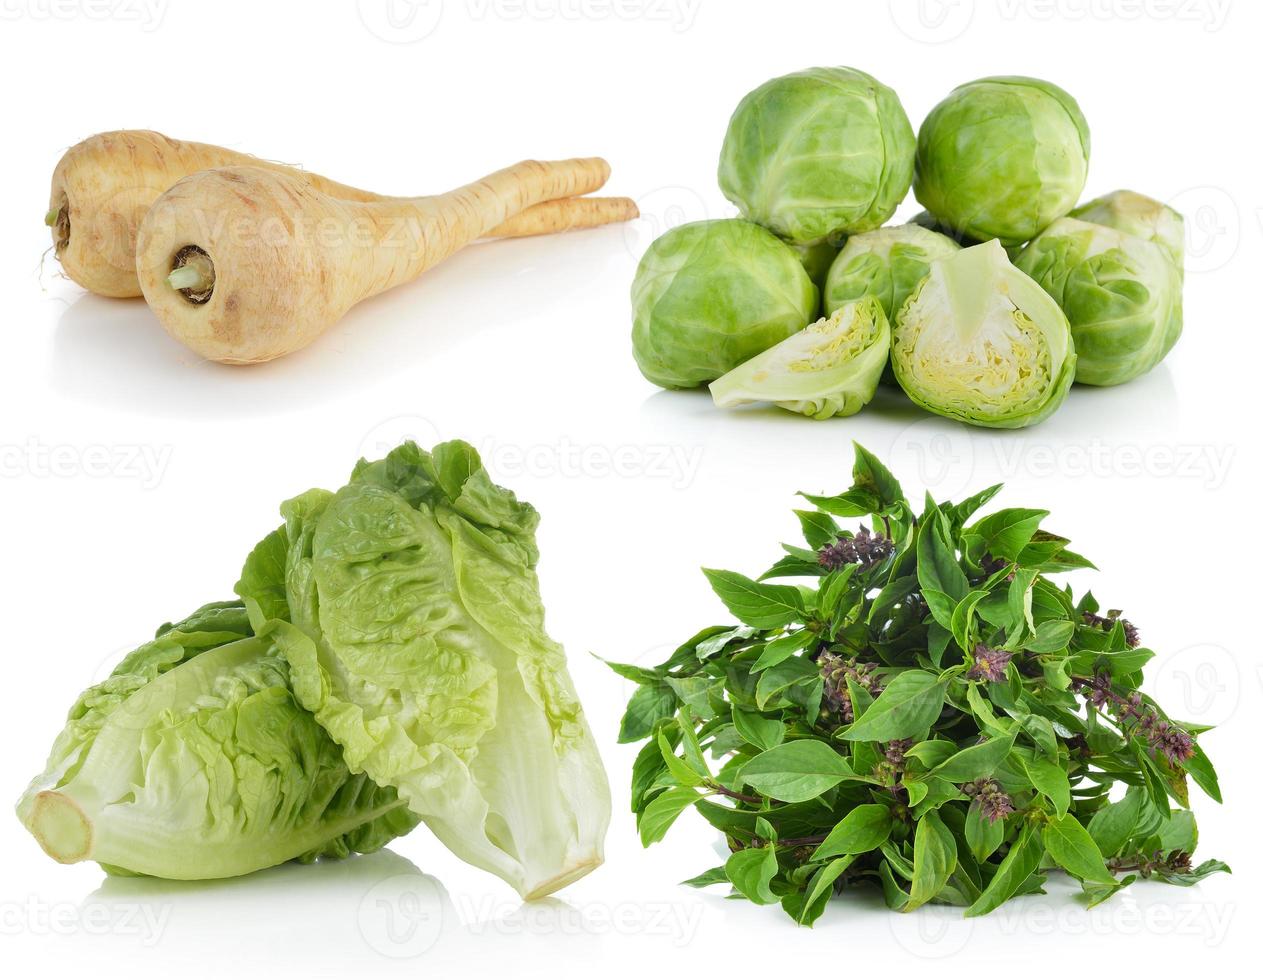 parsnip roots, baby cos, Brussel Sprouts, Sweet Basil on white background photo